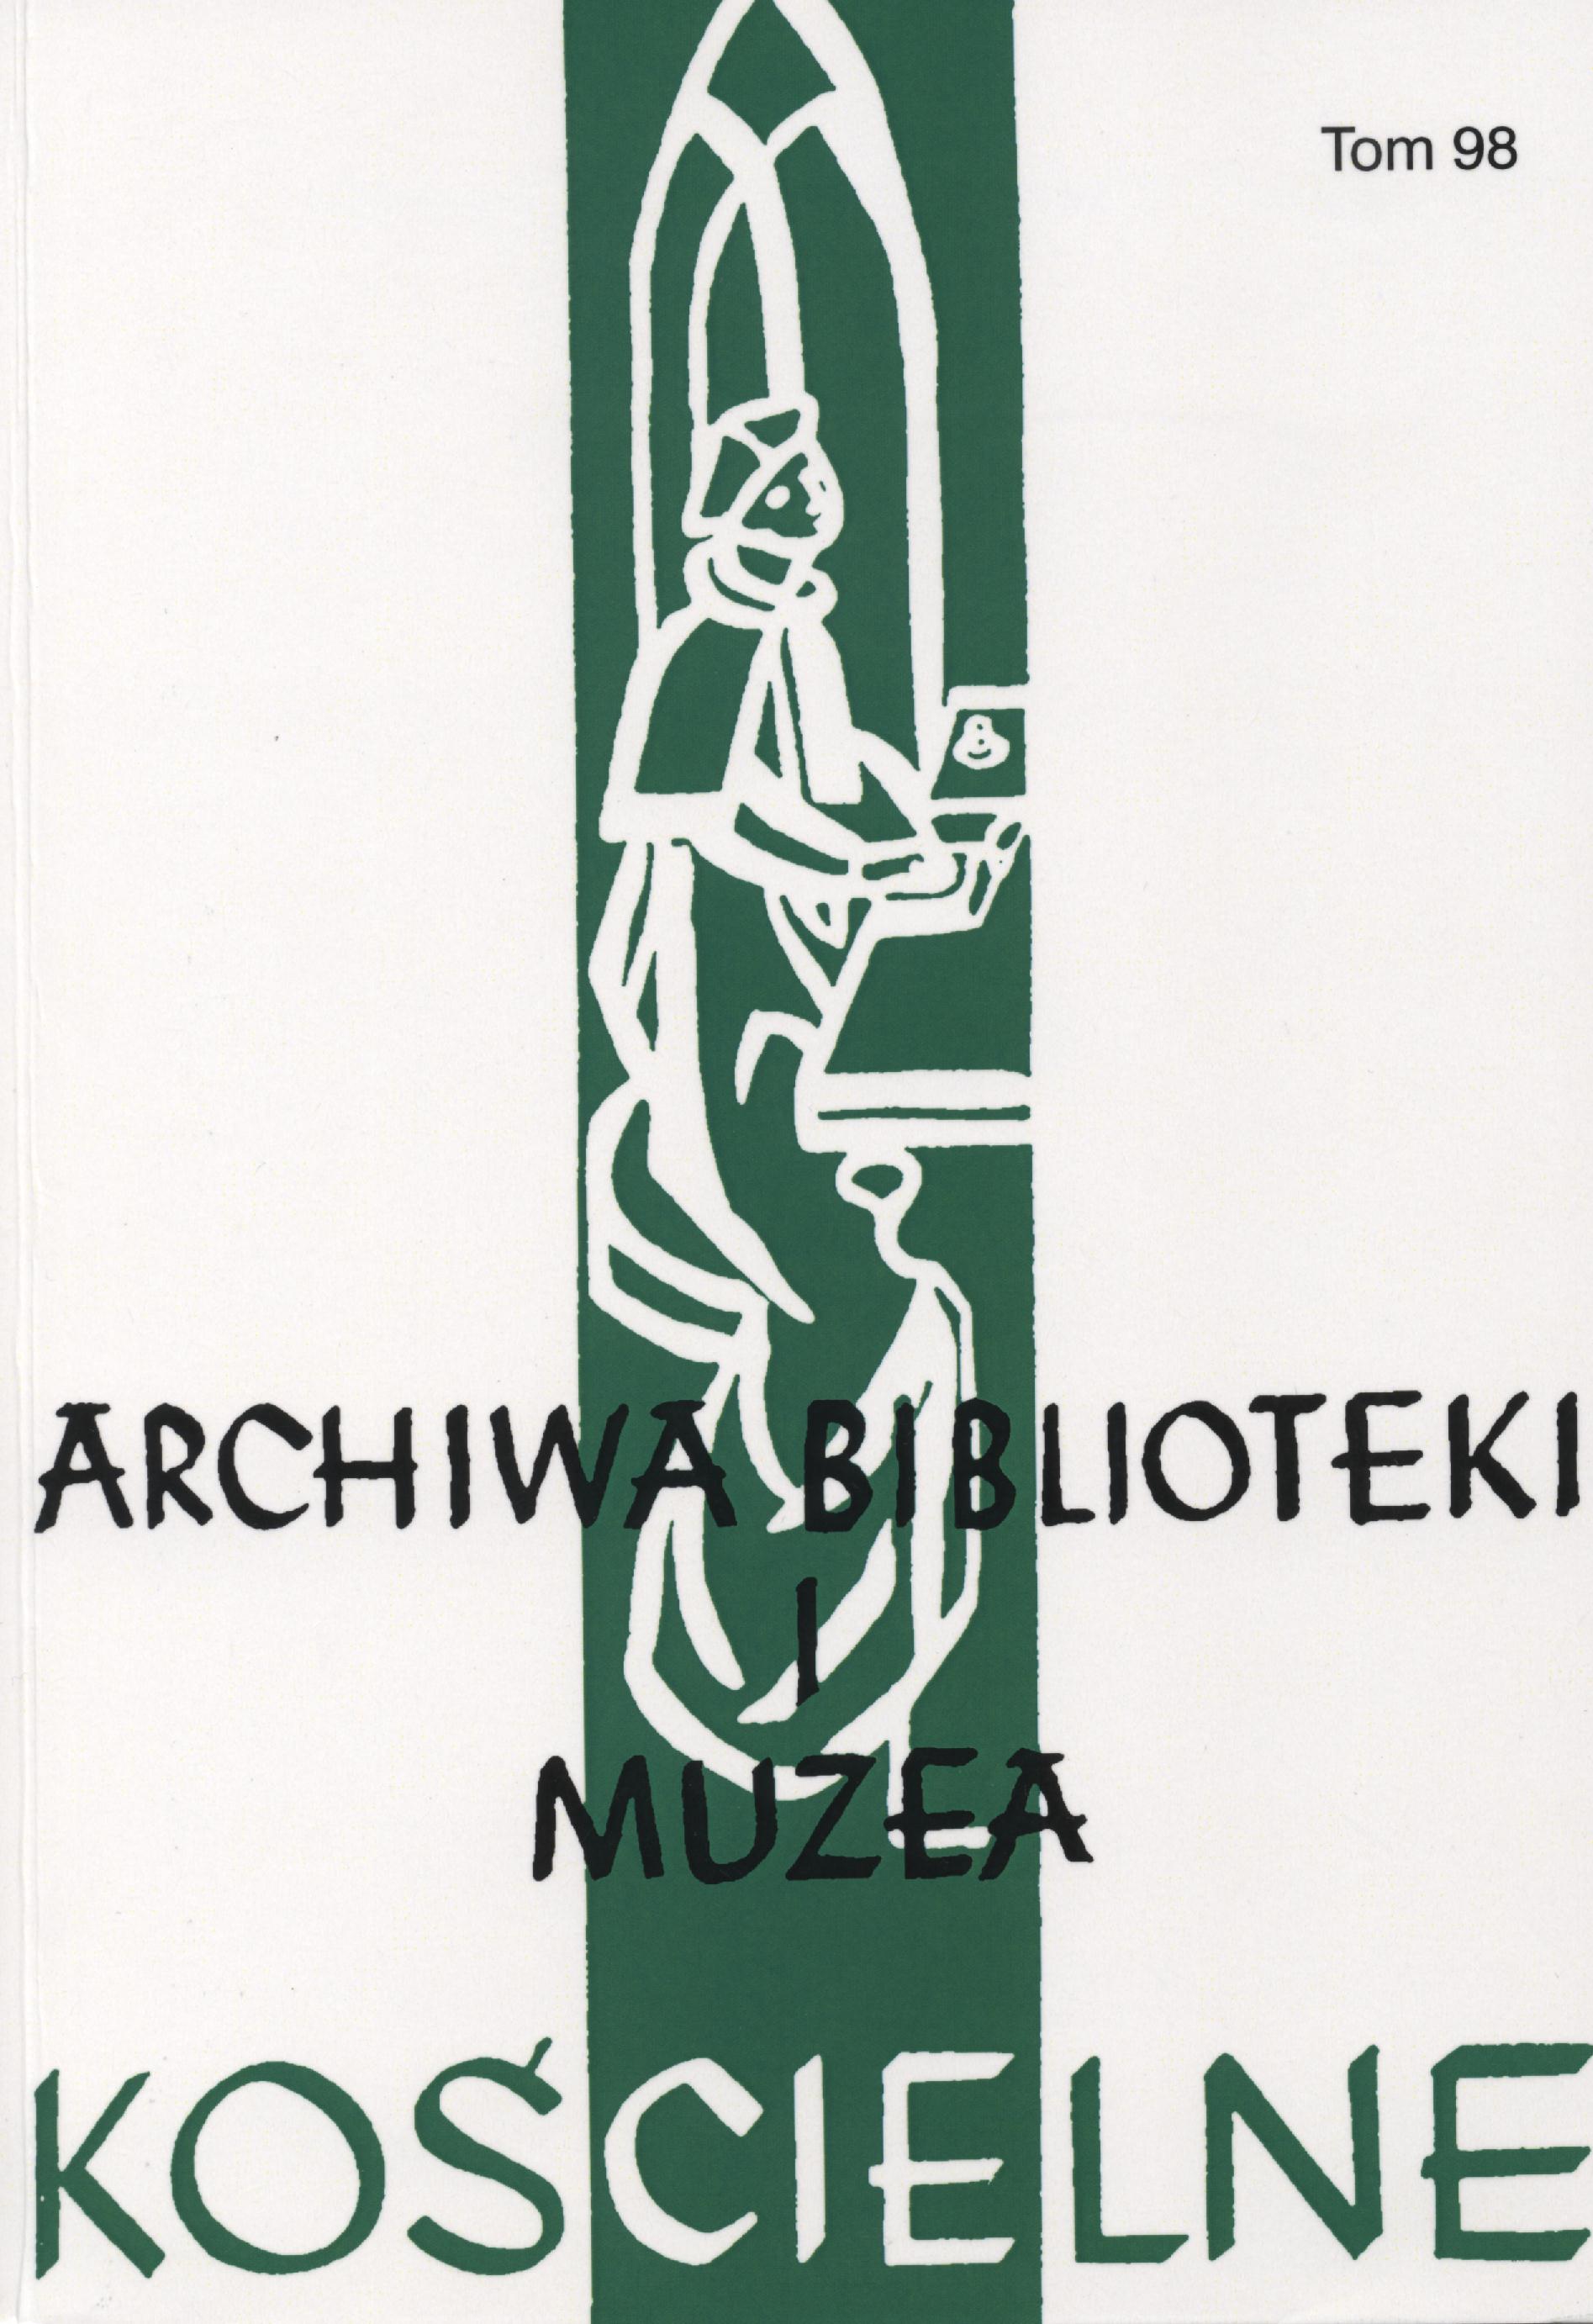 Church Archives, Libraries and Museums Cover Image